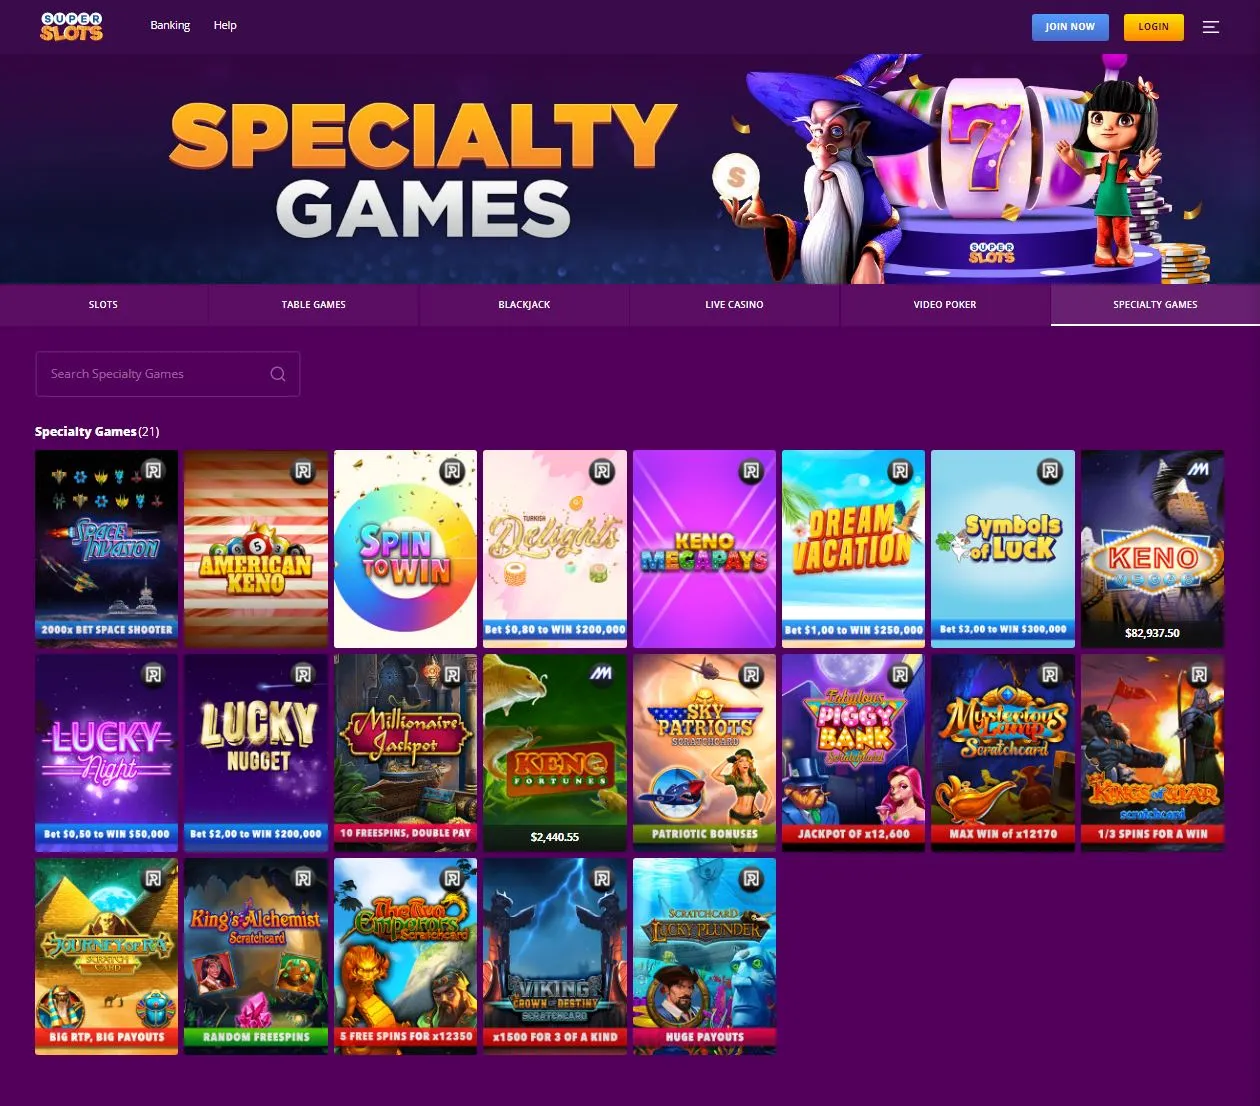 Super Slots Casino Specialty Games Section Image 